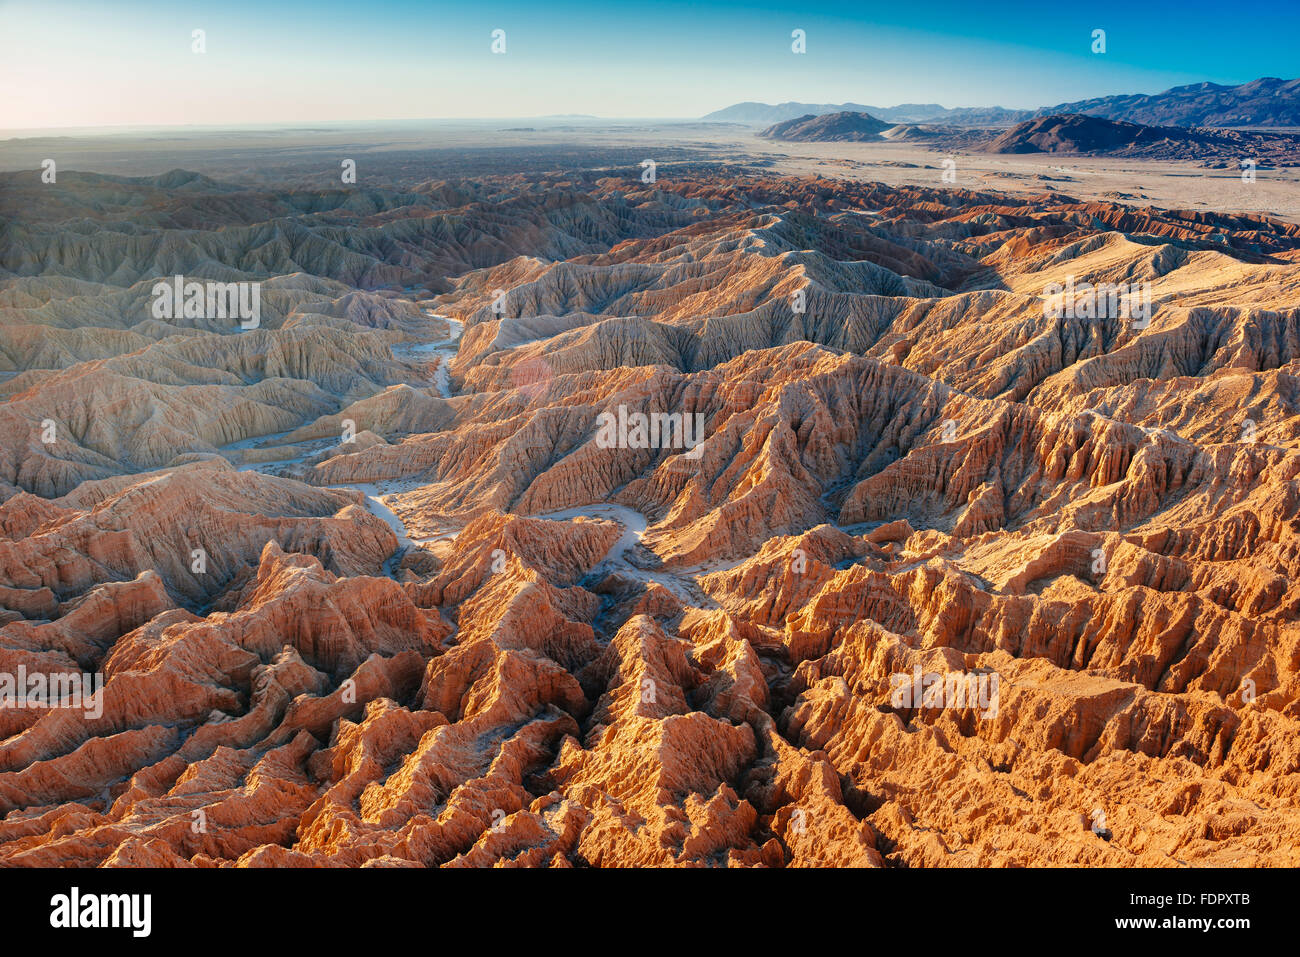 The view from Font's Point in Anza-Borrego Desert State Park, California Stock Photo